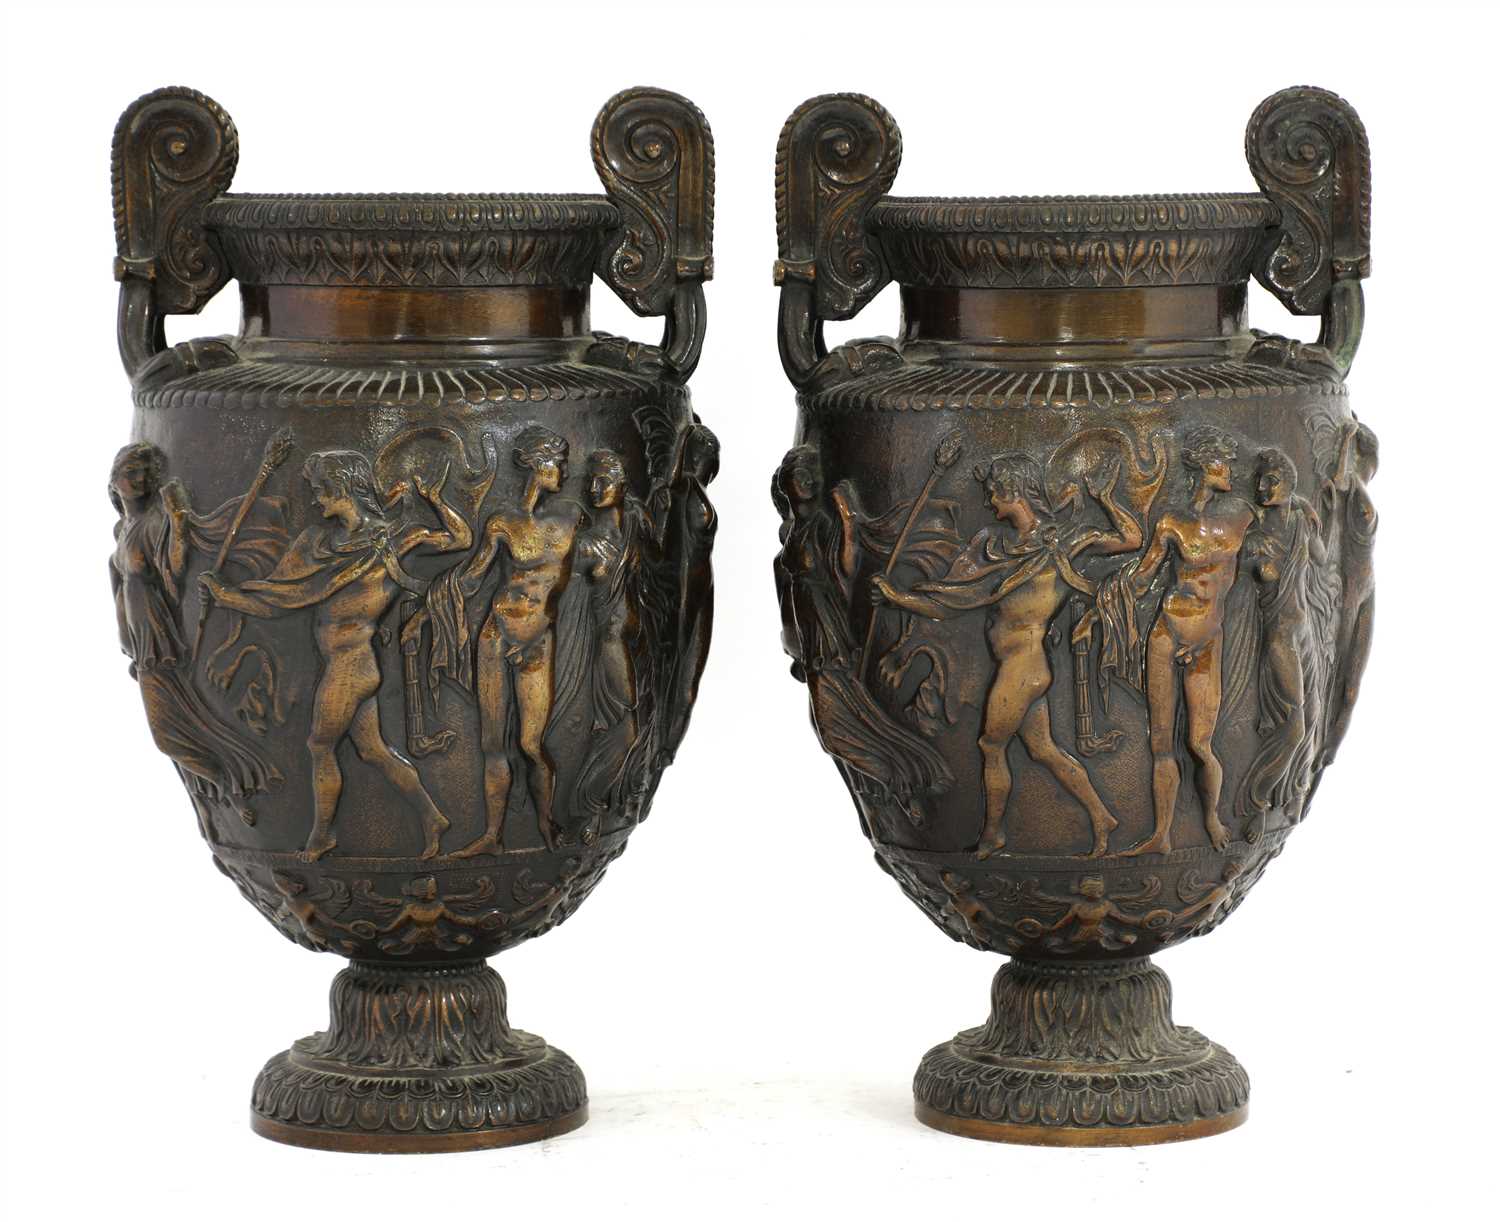 Lot 107 - A pair of classical-style bronze amphorae